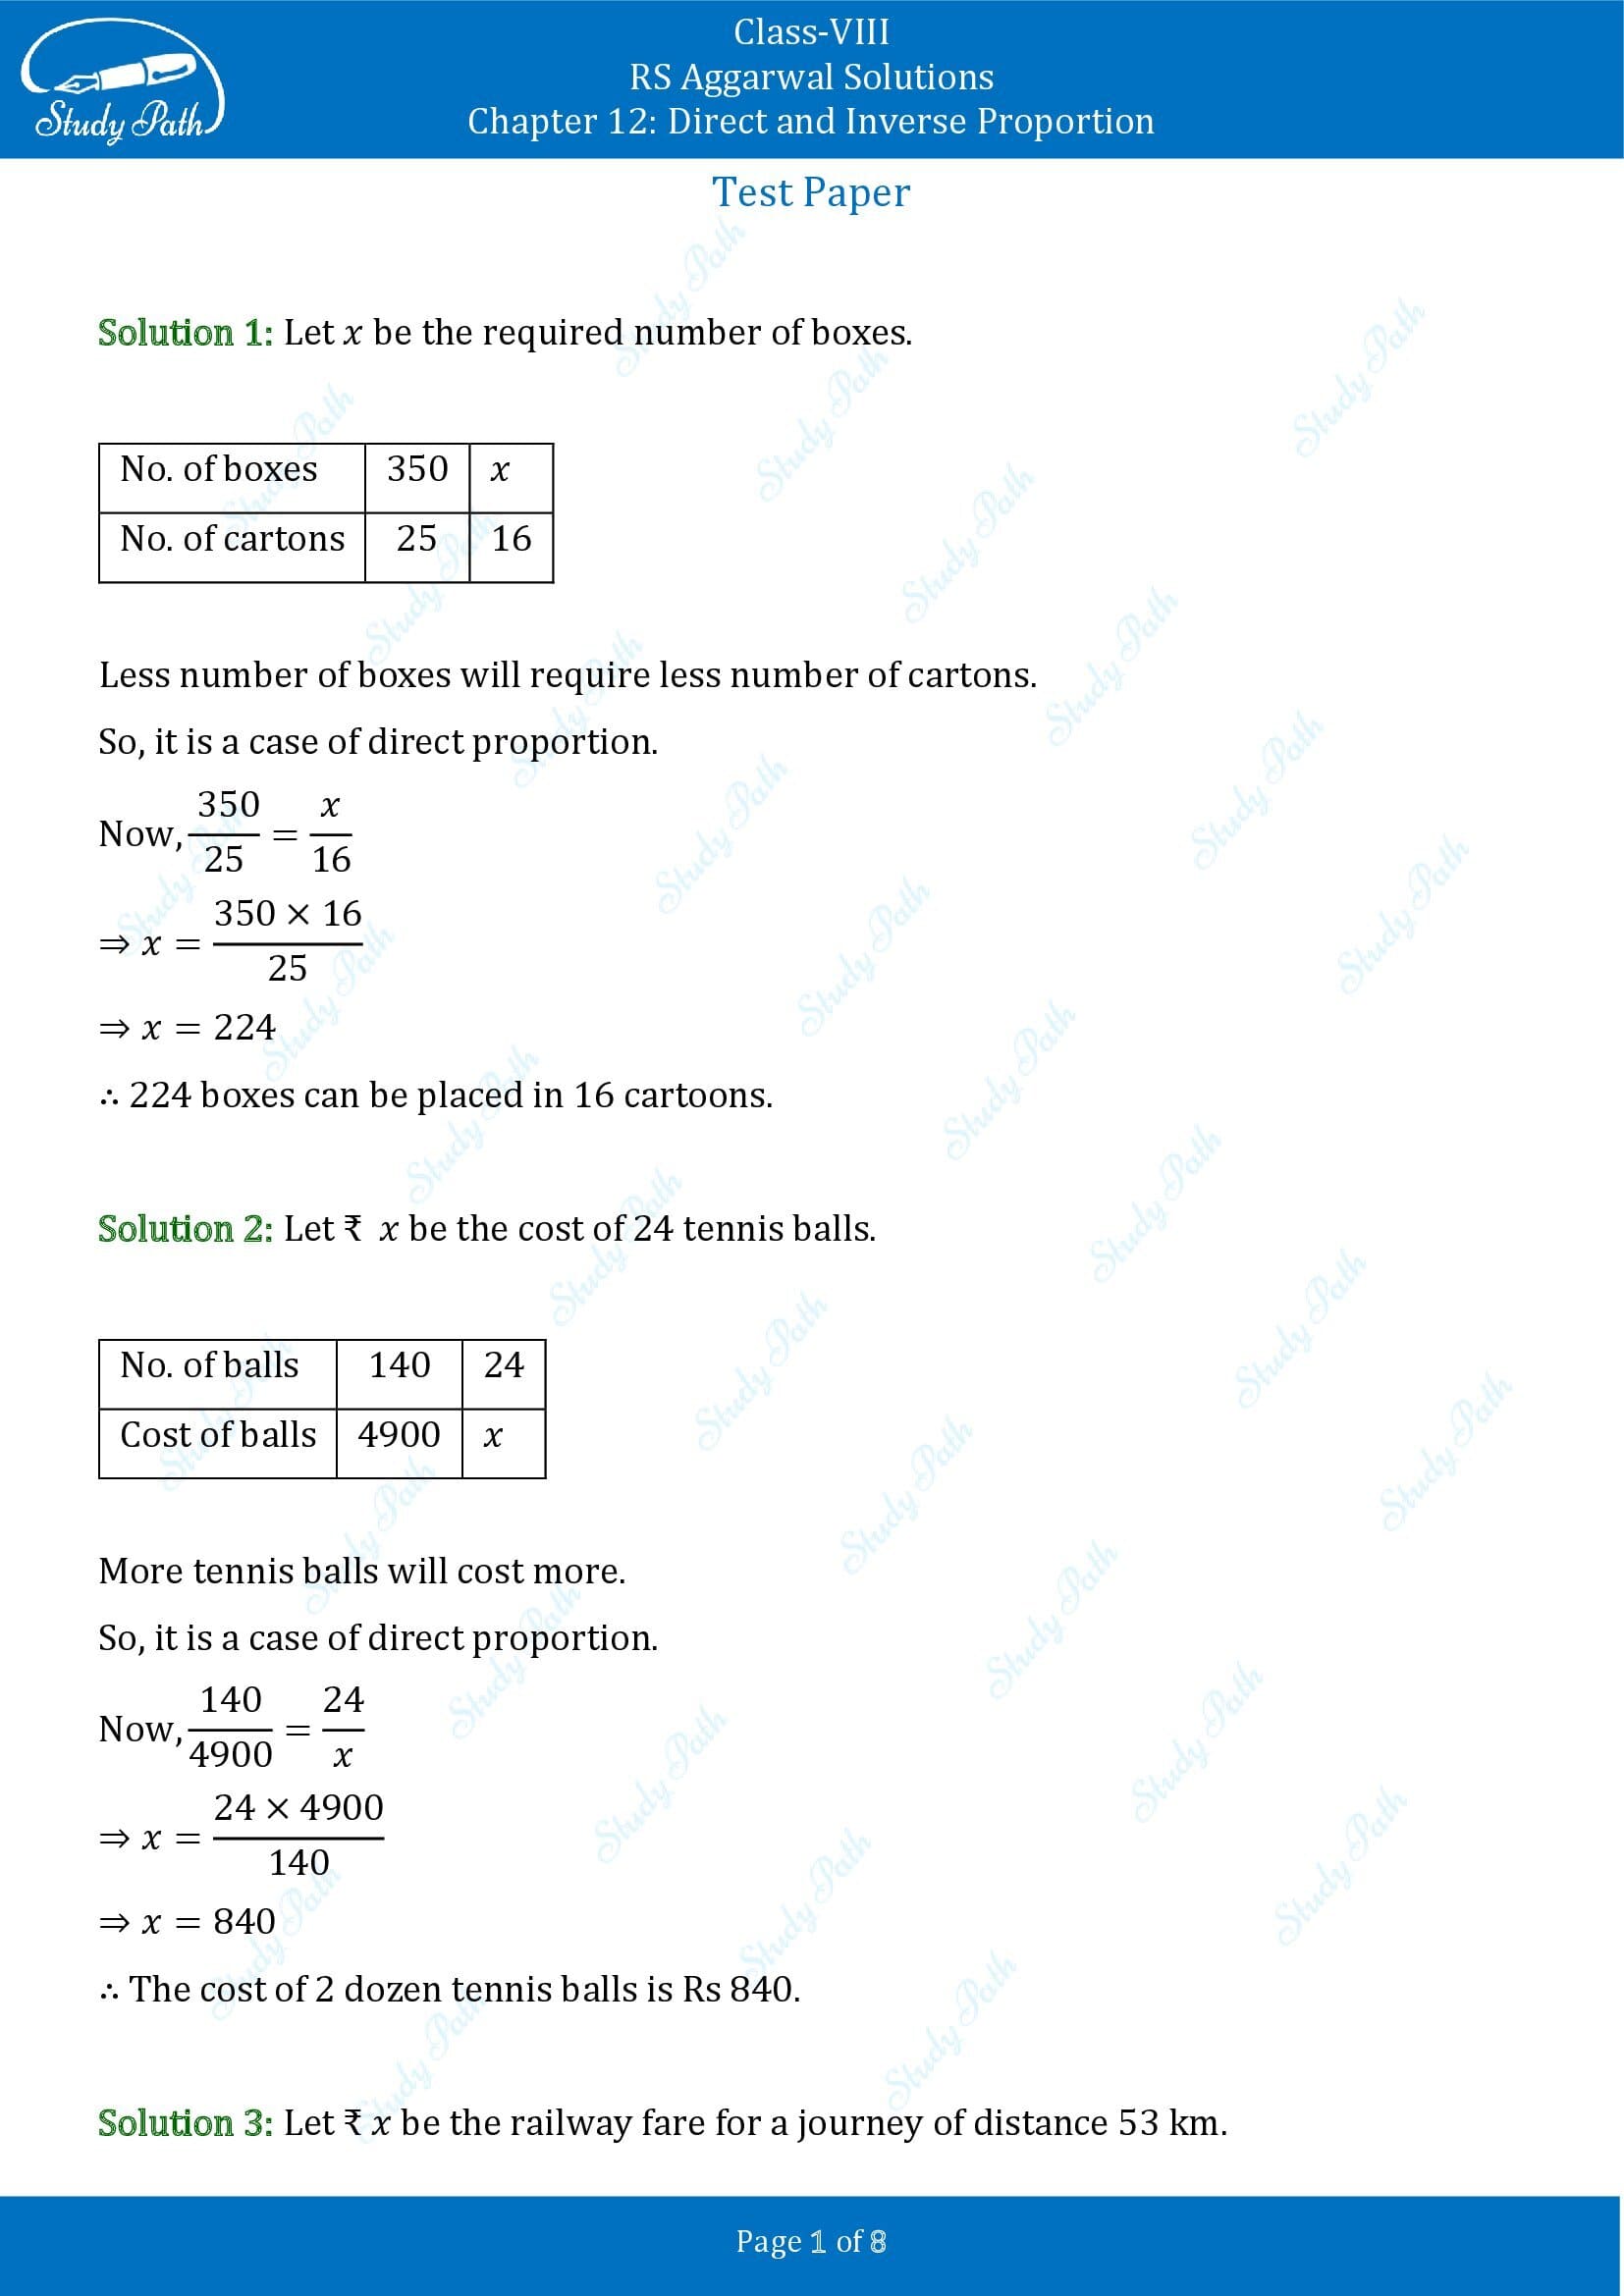 RS Aggarwal Solutions Class 8 Chapter 12 Direct and Inverse Proportion Test Paper 00001